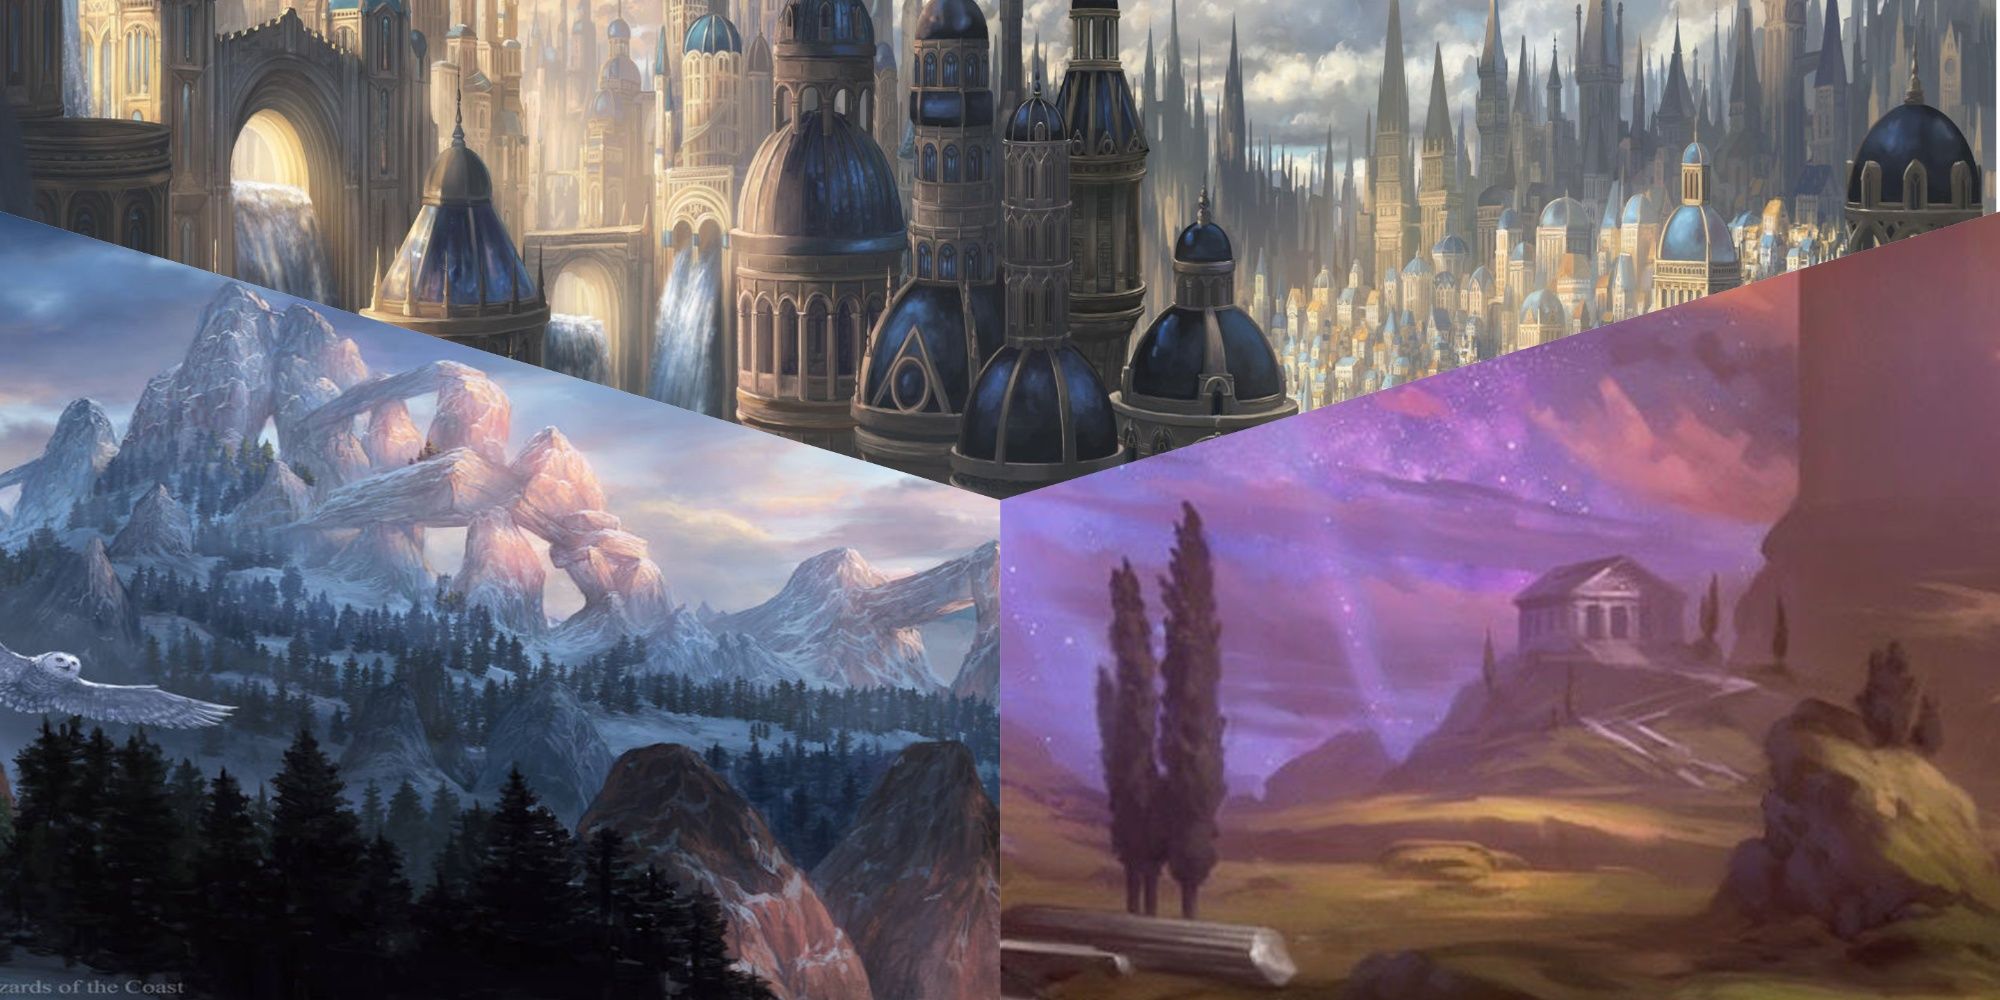 3 images: on the left is a snowy mountain with pine forests in front of it, on the right is a temple next a mountain with stars whirling overhead, and at tht top there is a city of regal blue domes with waterfalls under archways